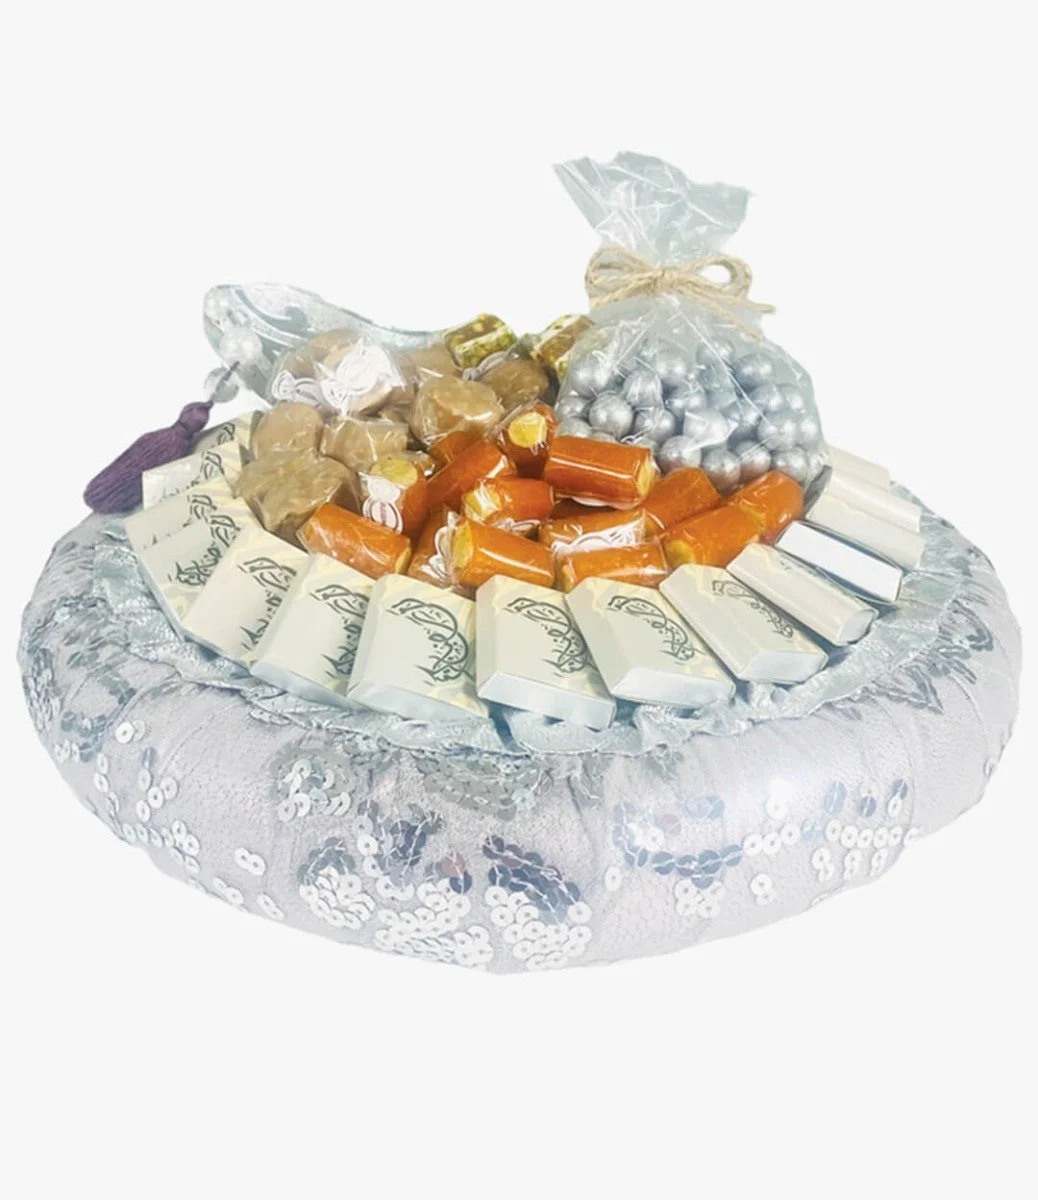 A Whole New World - Medium Assorted Chocolate Gift Tray